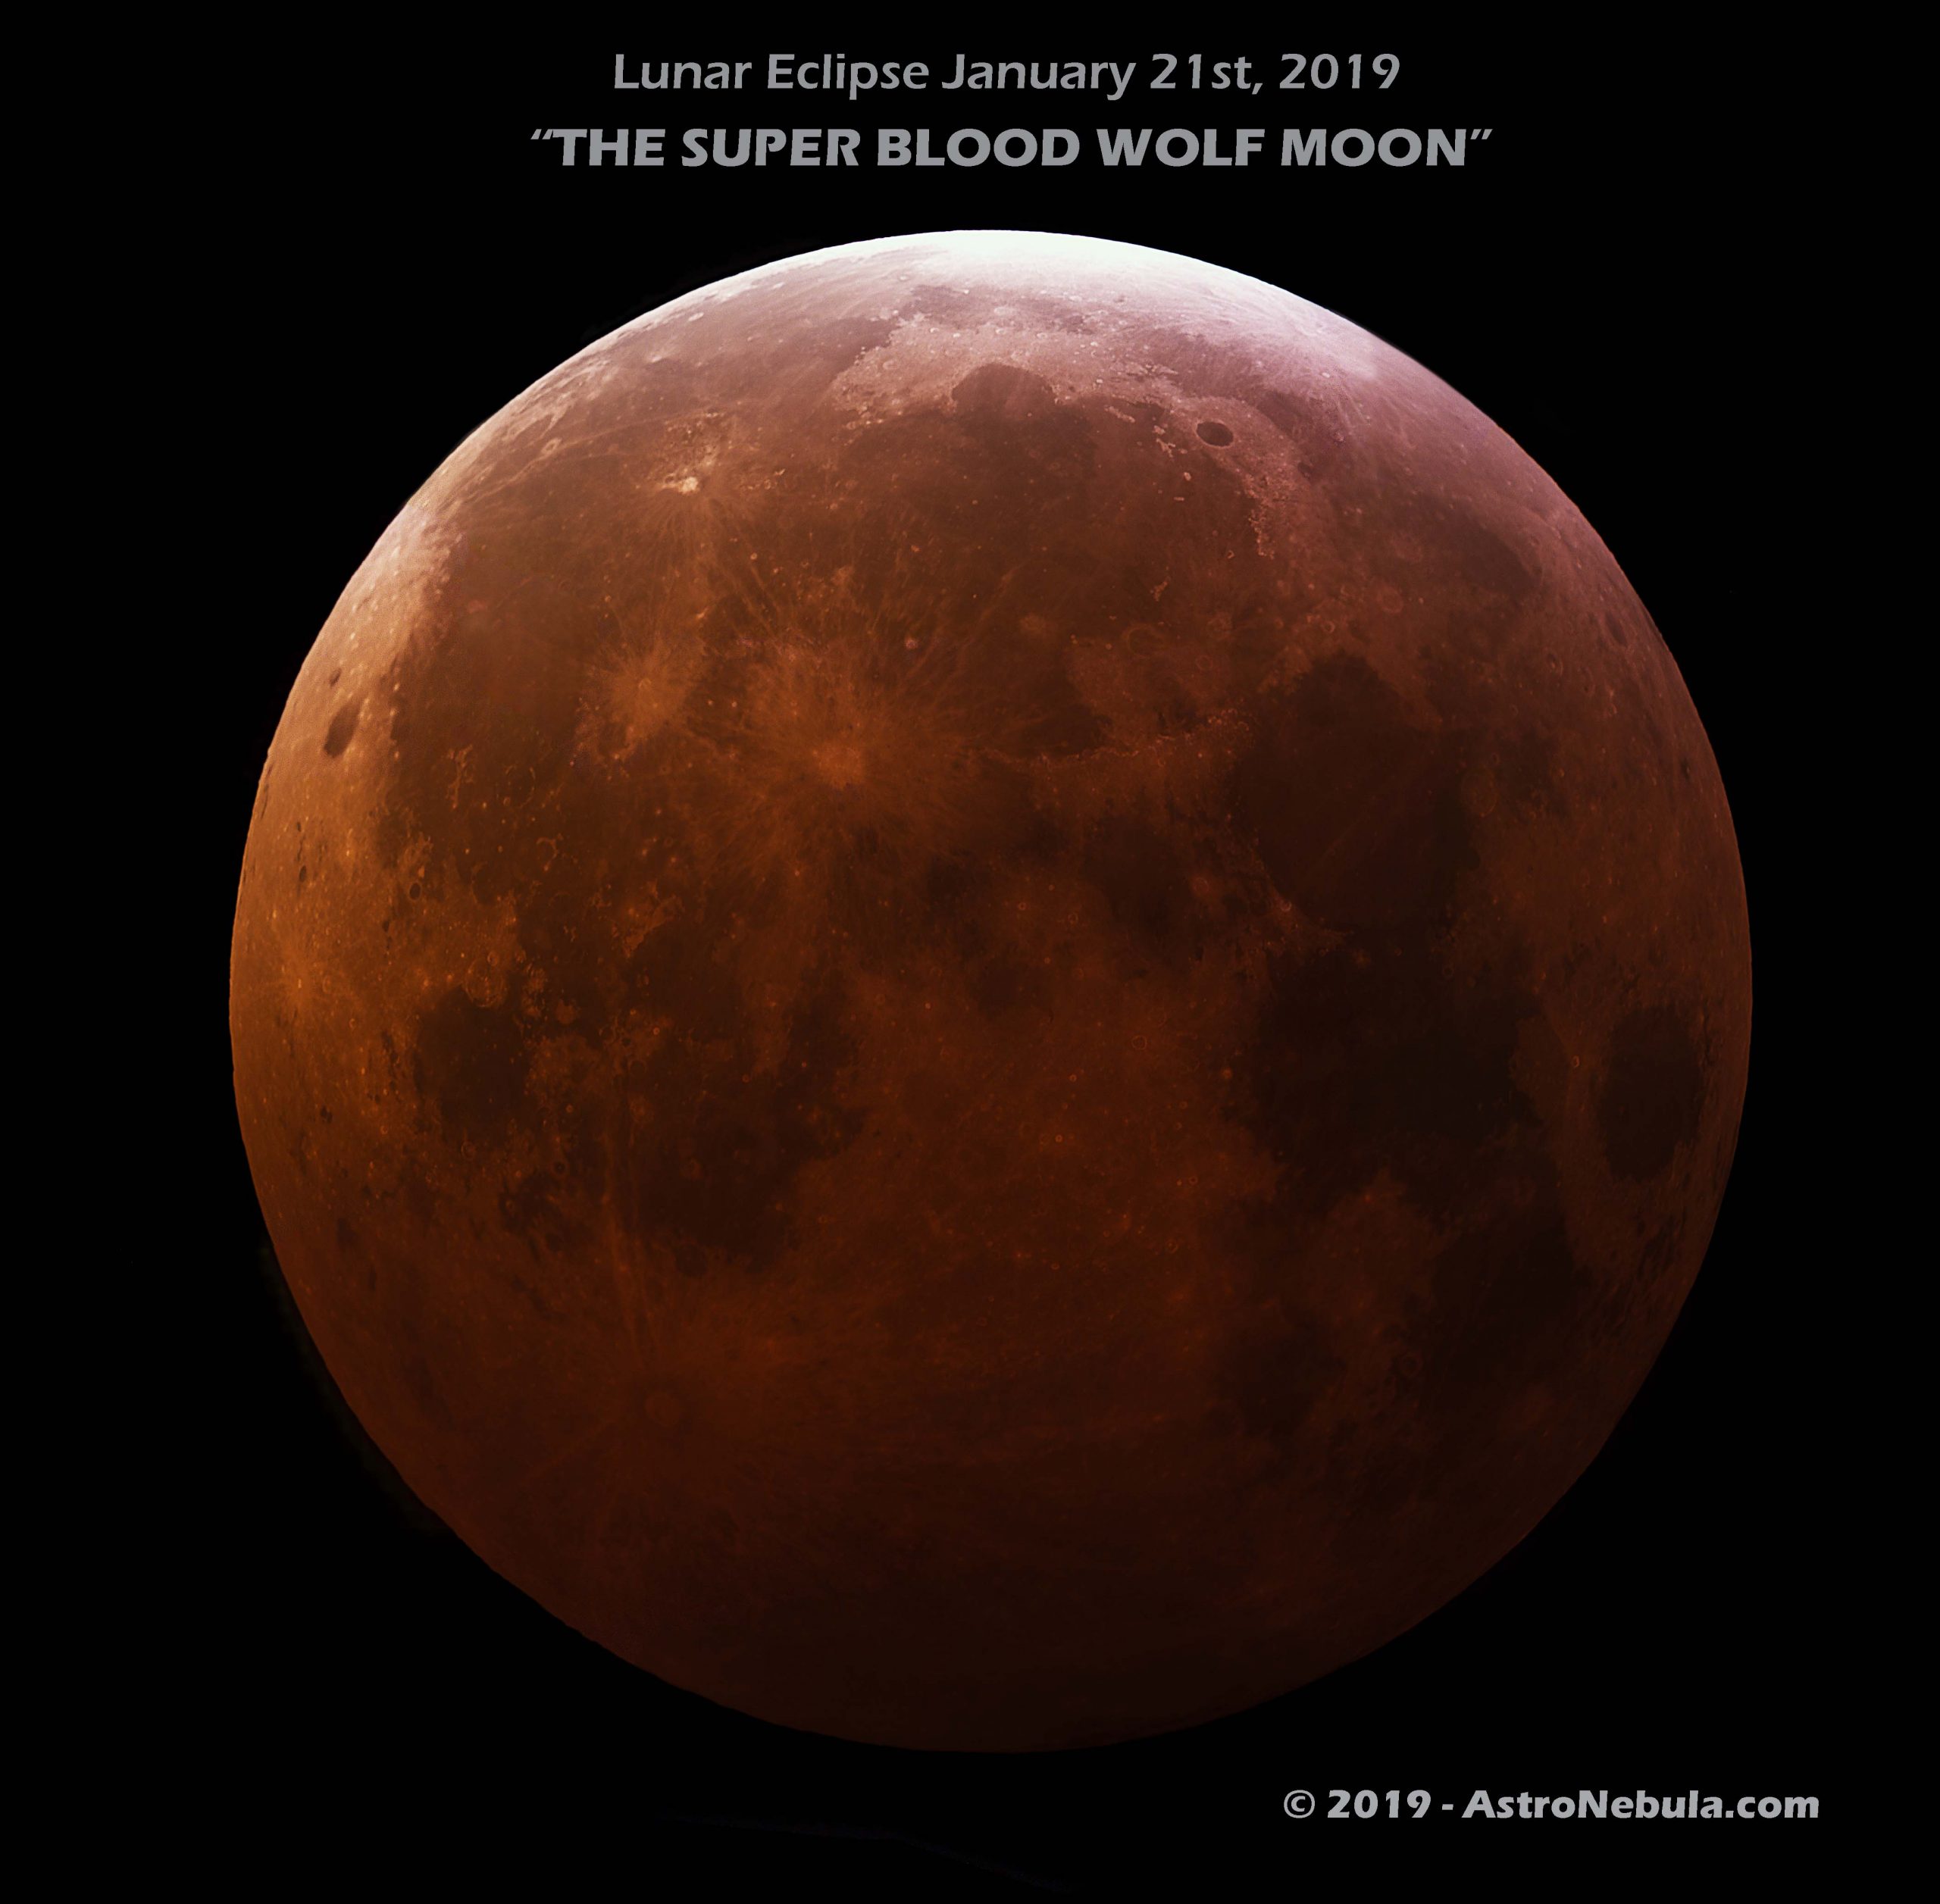 Super Blood Wolf Lunar Eclipse of January 2019. This was a Supermoon and a Total Lunar Eclipse at the same time. Therefore it's title.